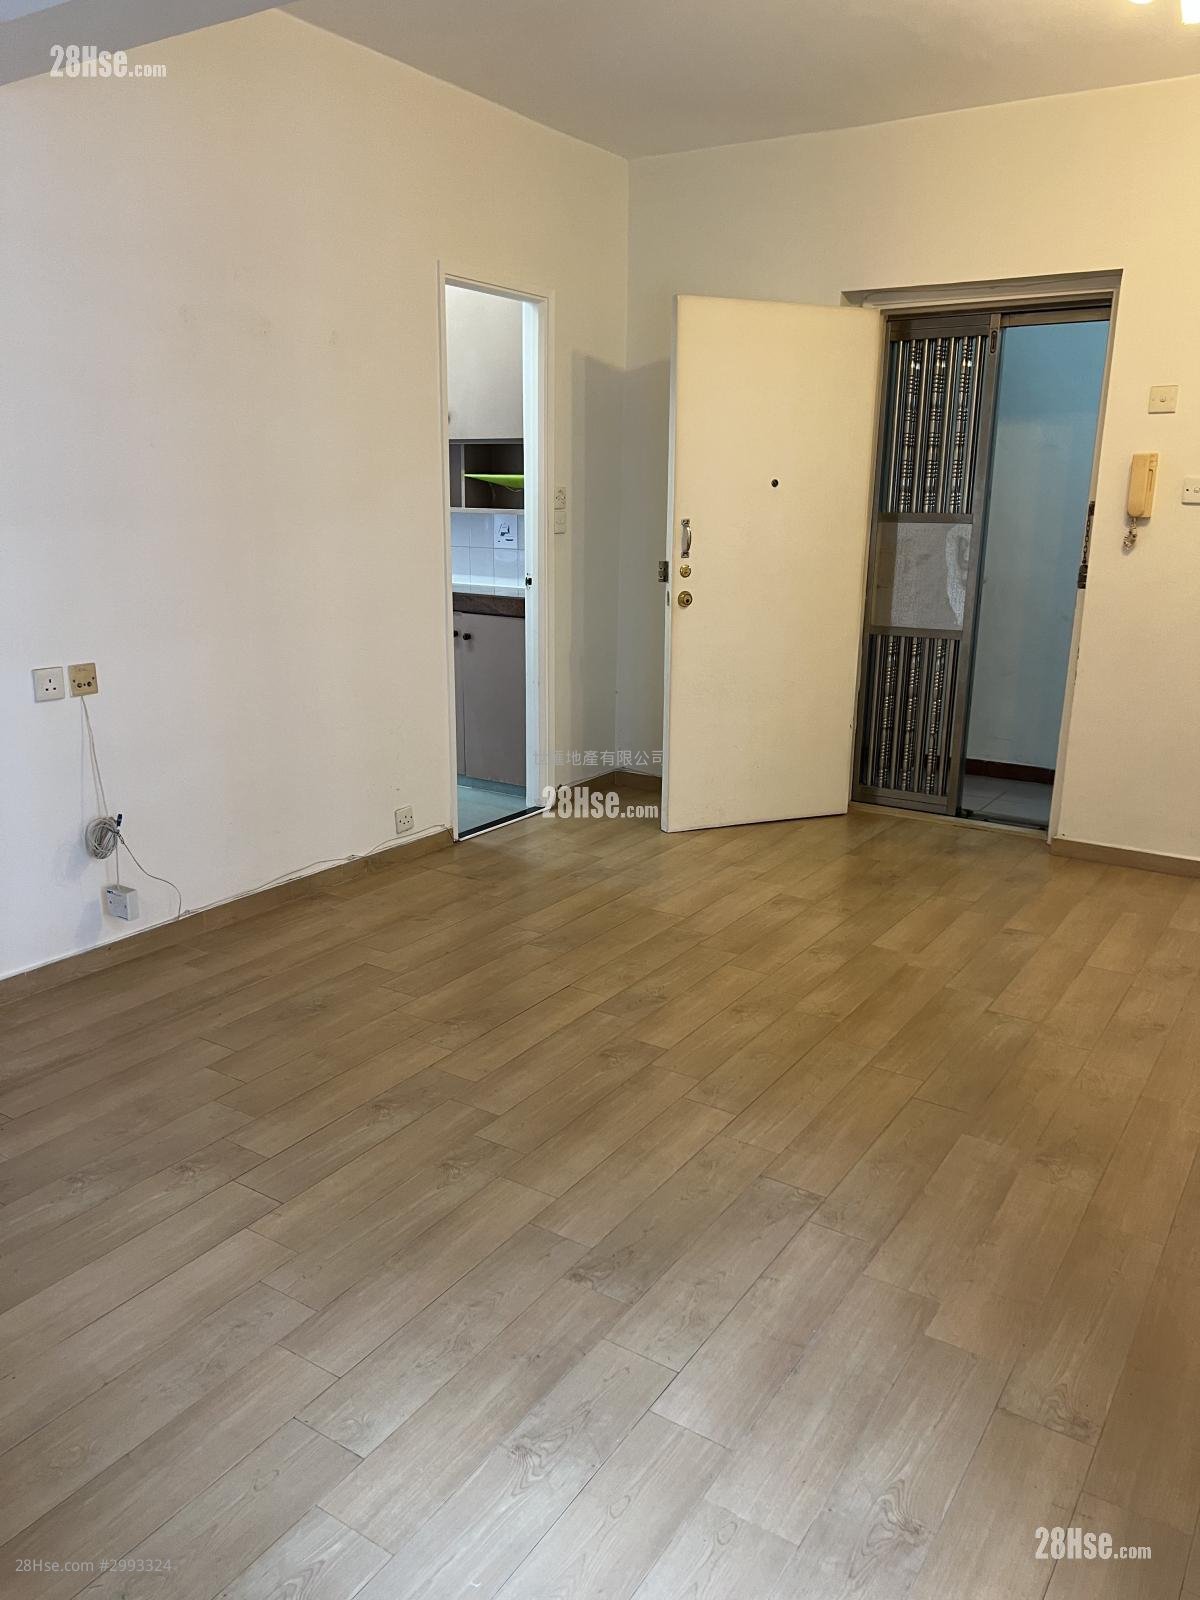 Cheung Yuen Building Sell 3 bedrooms , 2 bathrooms 656 ft²